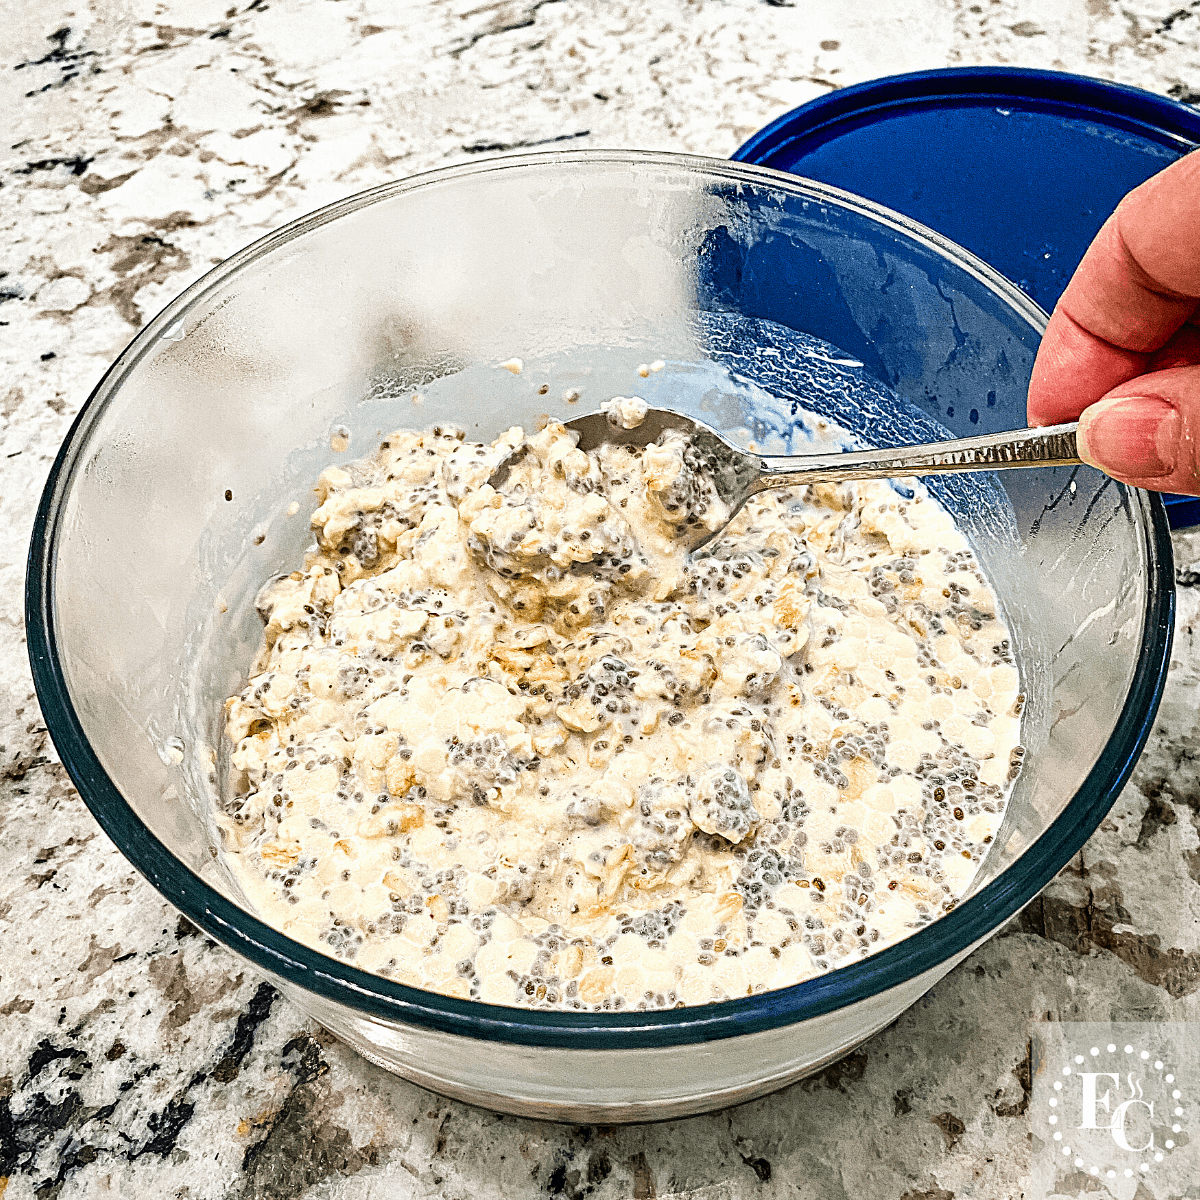 A glass bowl of thickened overnight oats being stirred with a teaspoon.